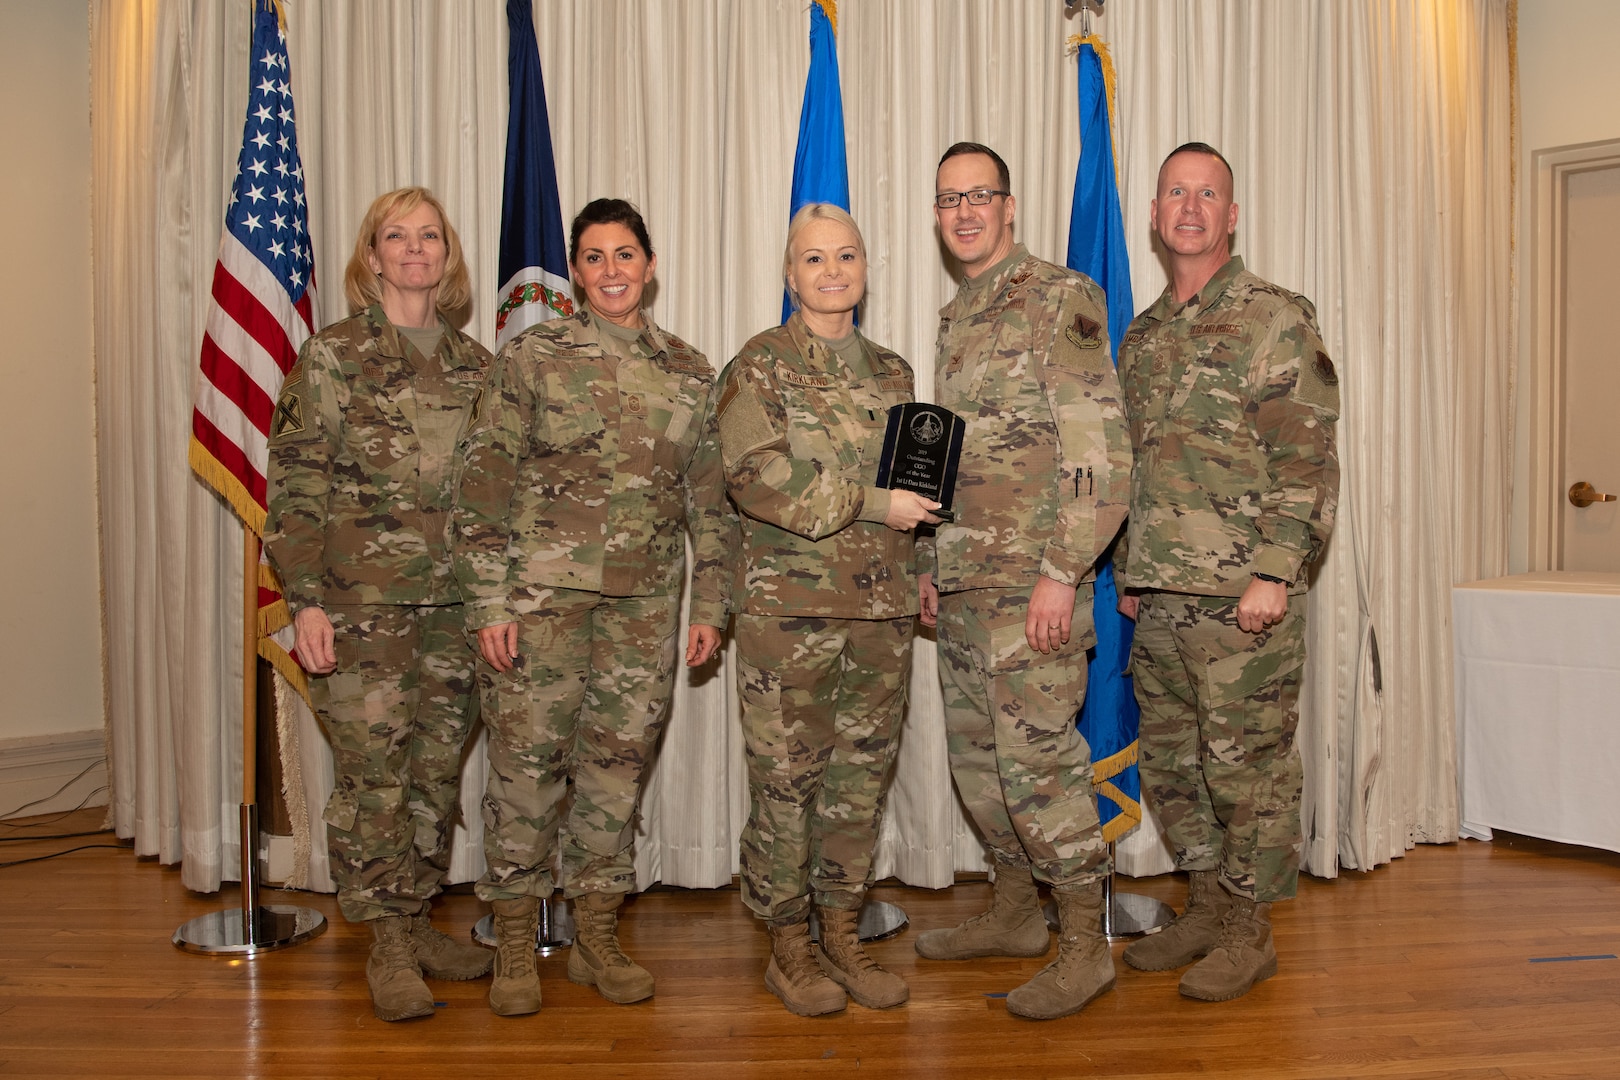 Airmen on a stage pose for a photo with award